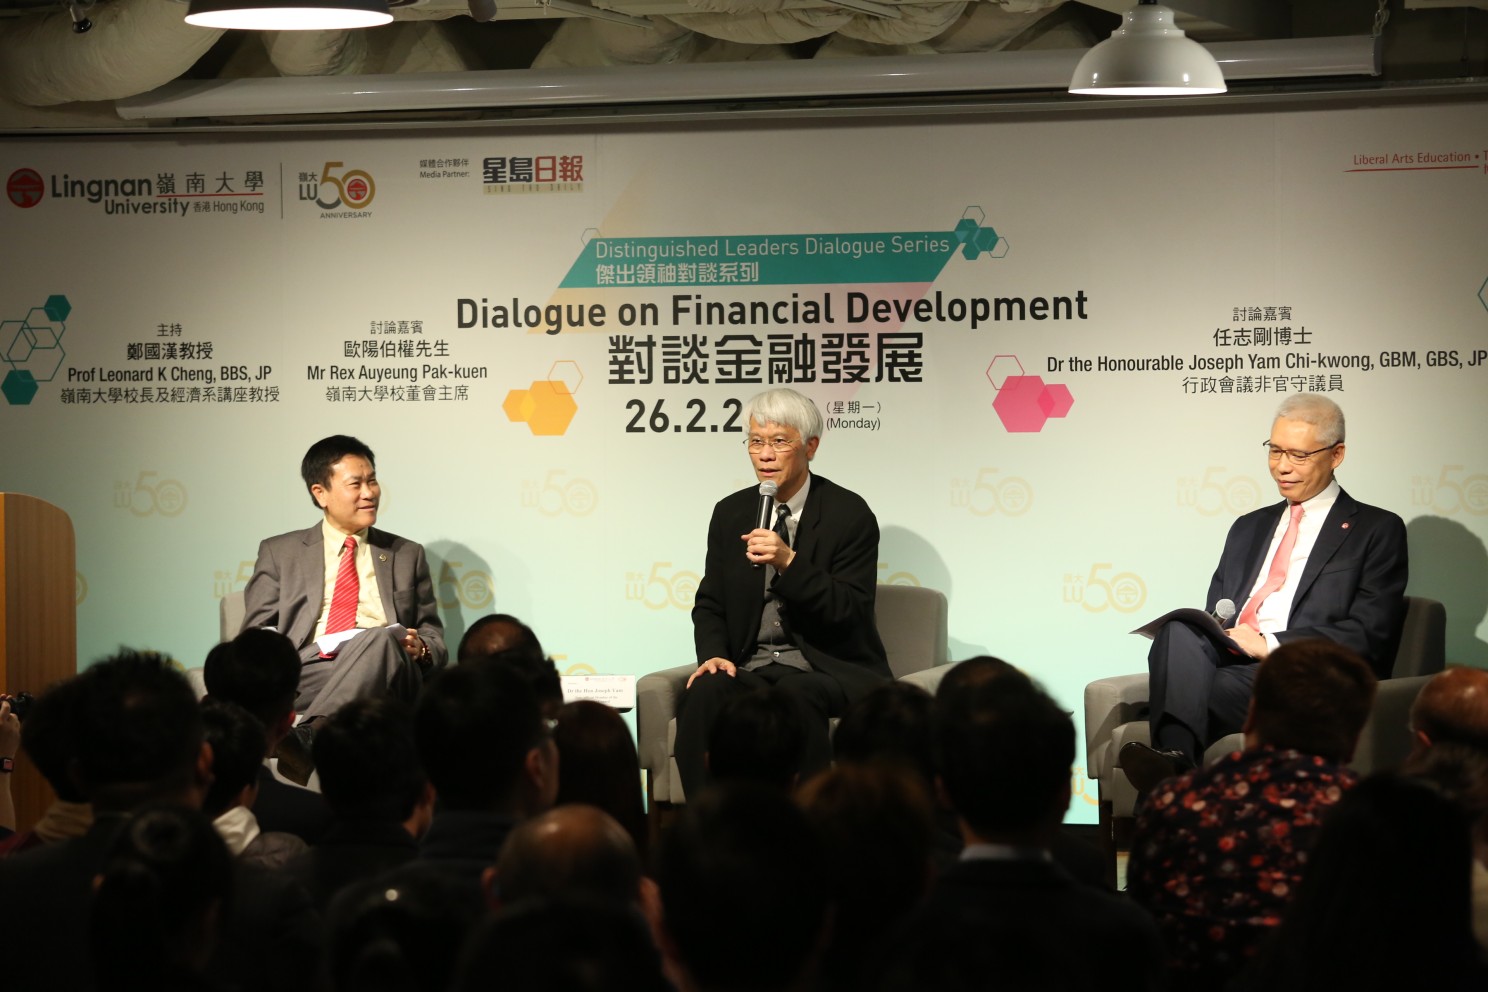 Distinguished Leaders Dialogue Series — Dialogue on Financial Development